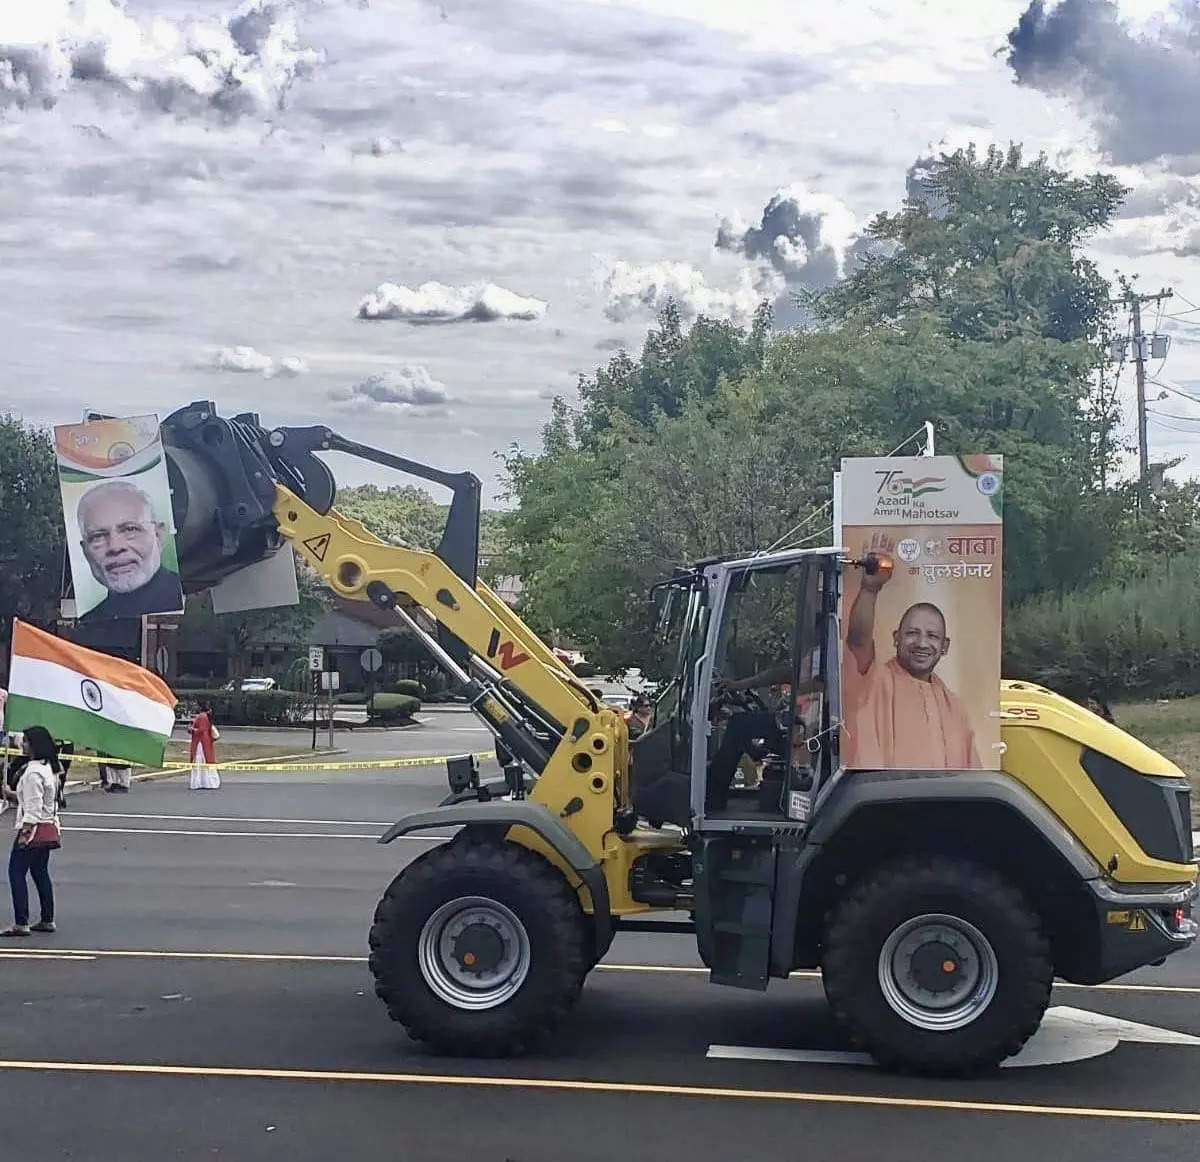 'Baba bulldozer' featuring posters of PM Modi, CM Yogi Adityanath joins Indian Independence Day celebrations in US